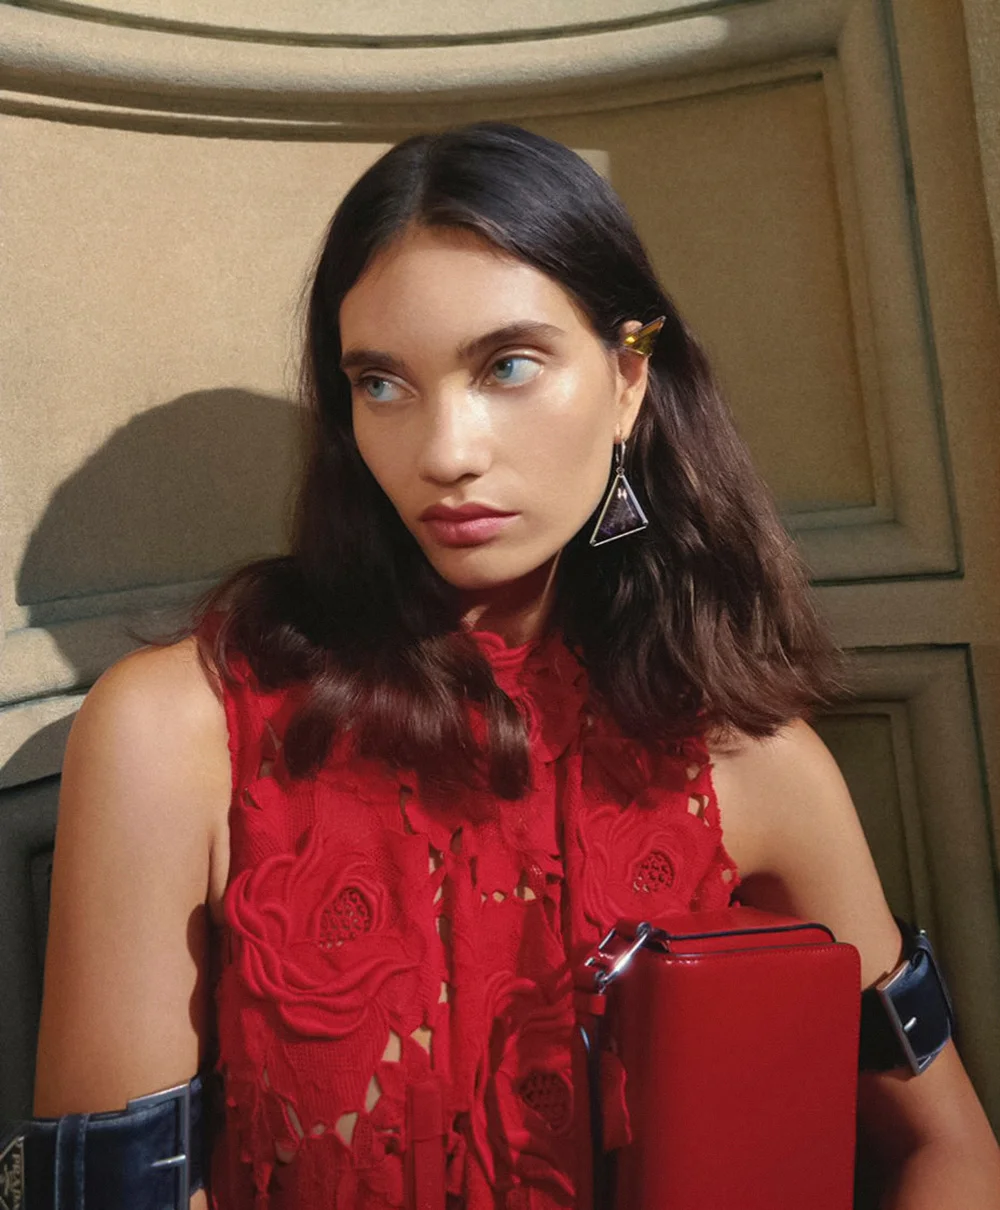 Holly Brown in Prada on Vogue Australia March 2022 Isaac Brown